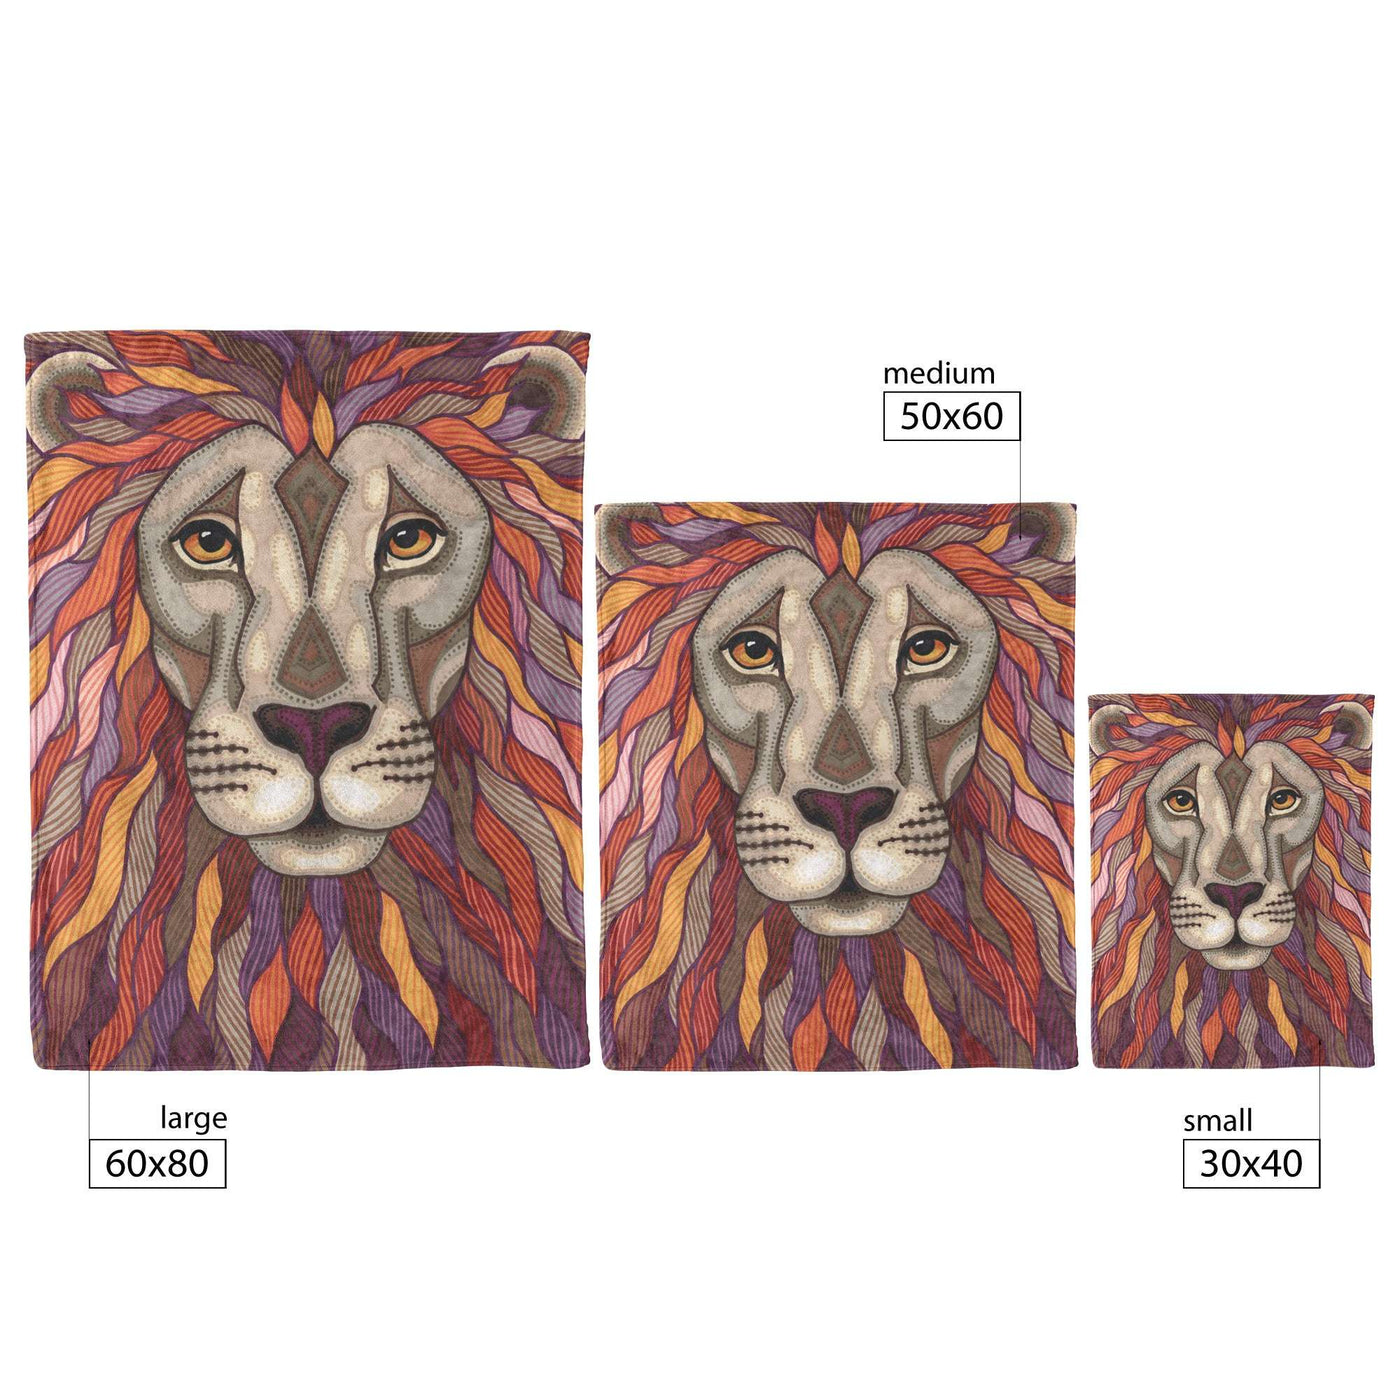 Three decorative Lion Pride Blankets featuring a lion's face with colorful, stylized mane, displayed in three sizes: large, medium, and small.